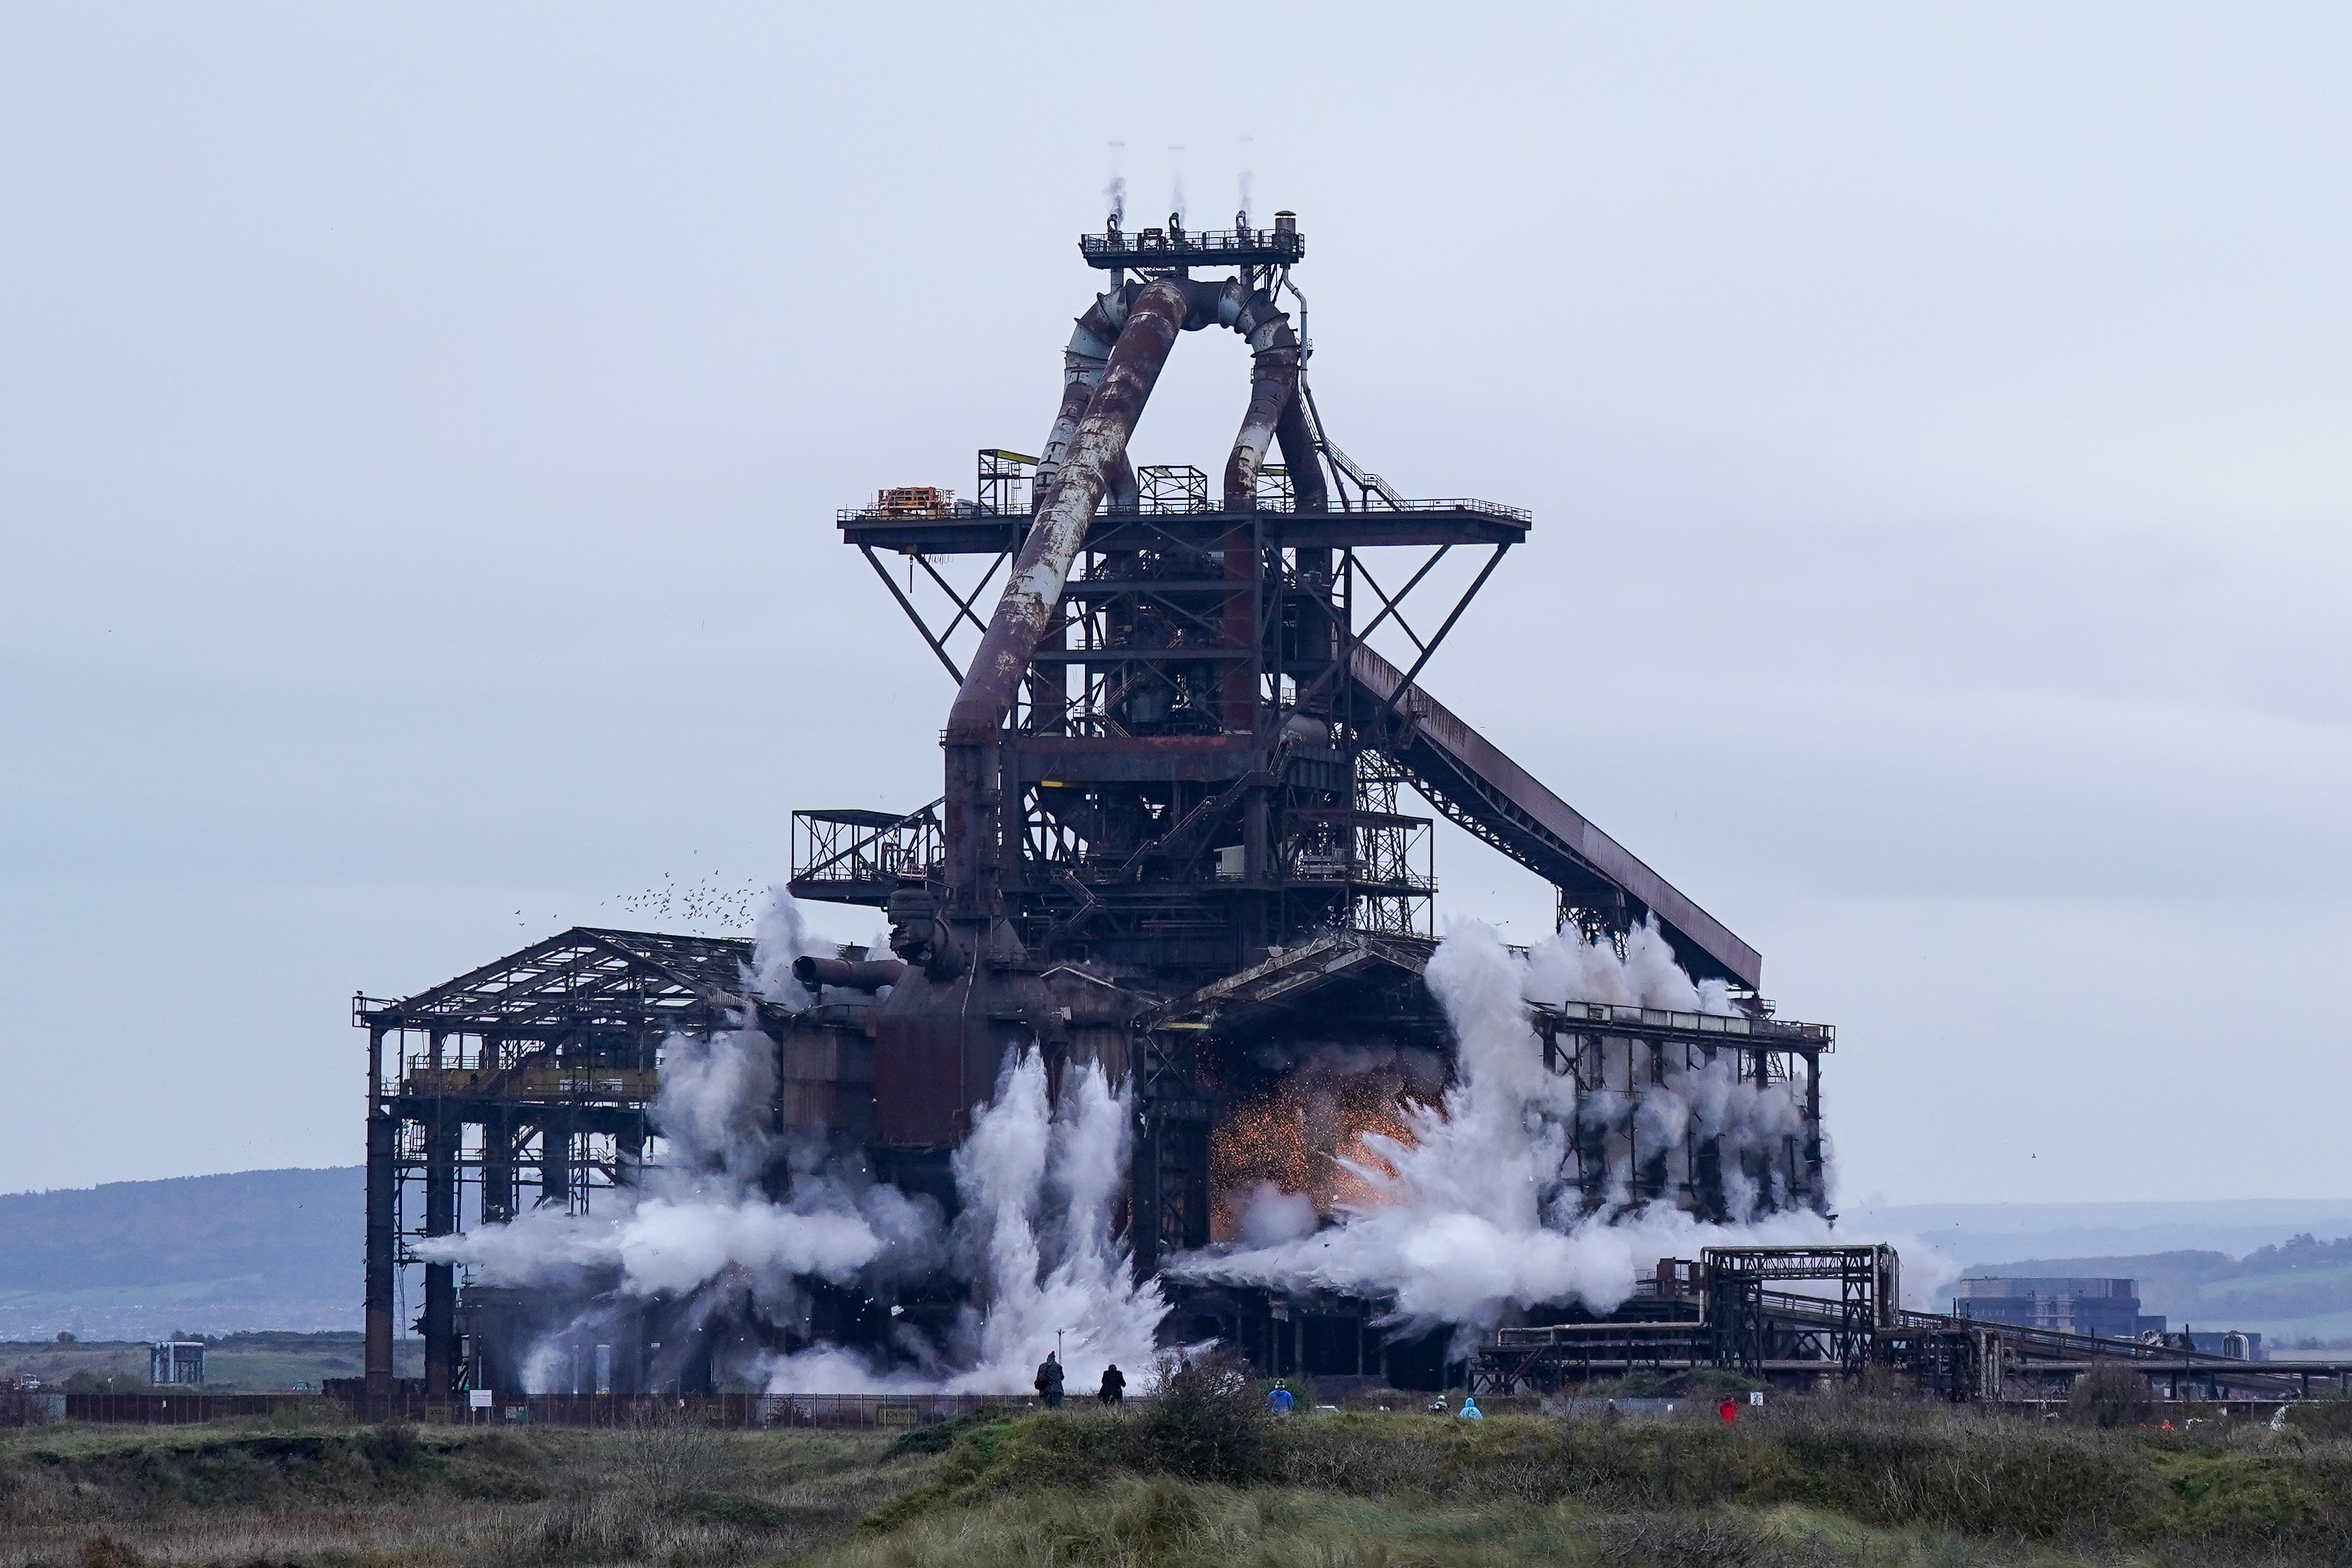 The former steel blast furnace near Redcar is brought down in an explosive demolition